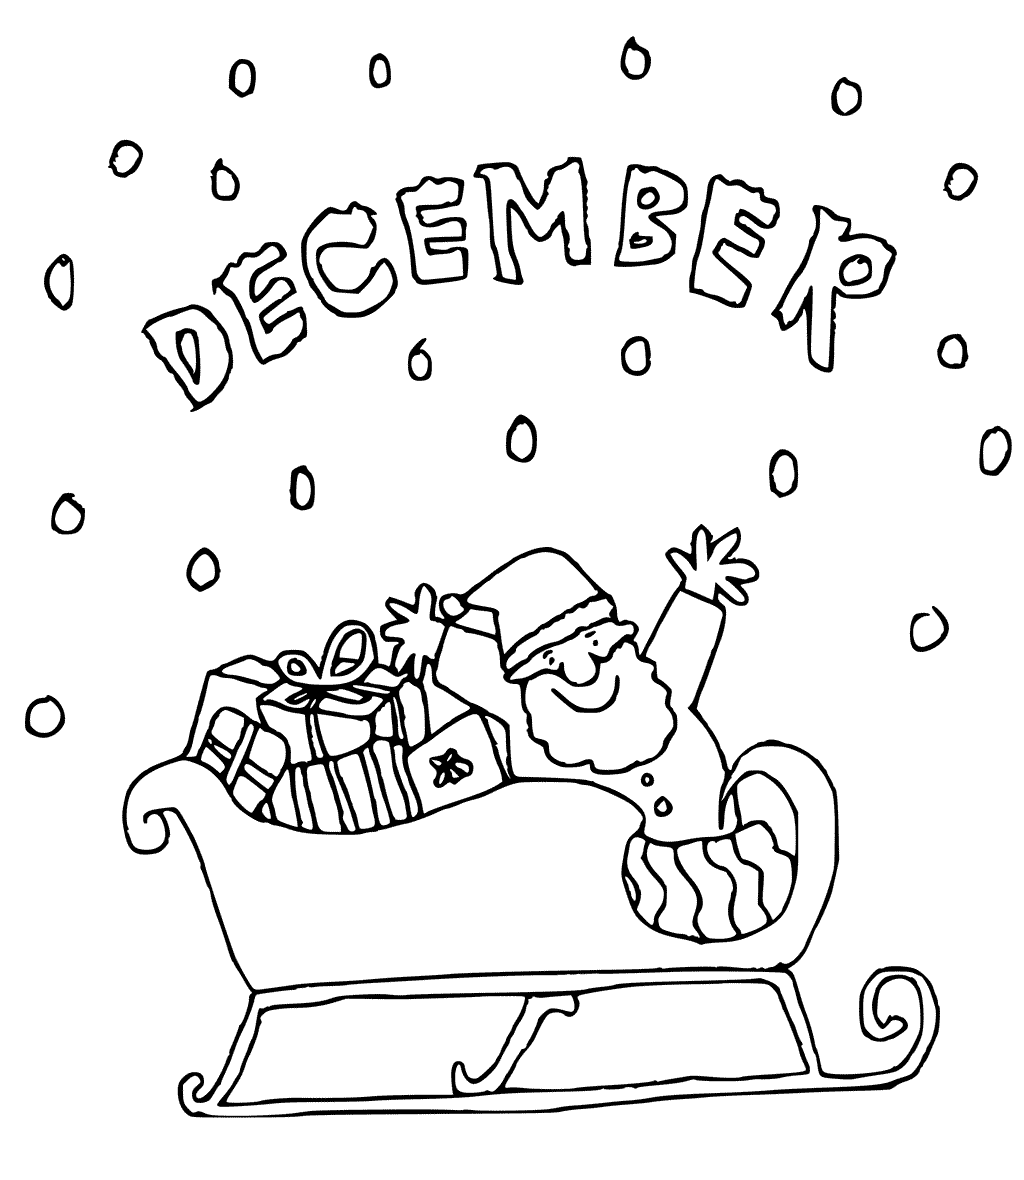 December with Santa Coloring Page